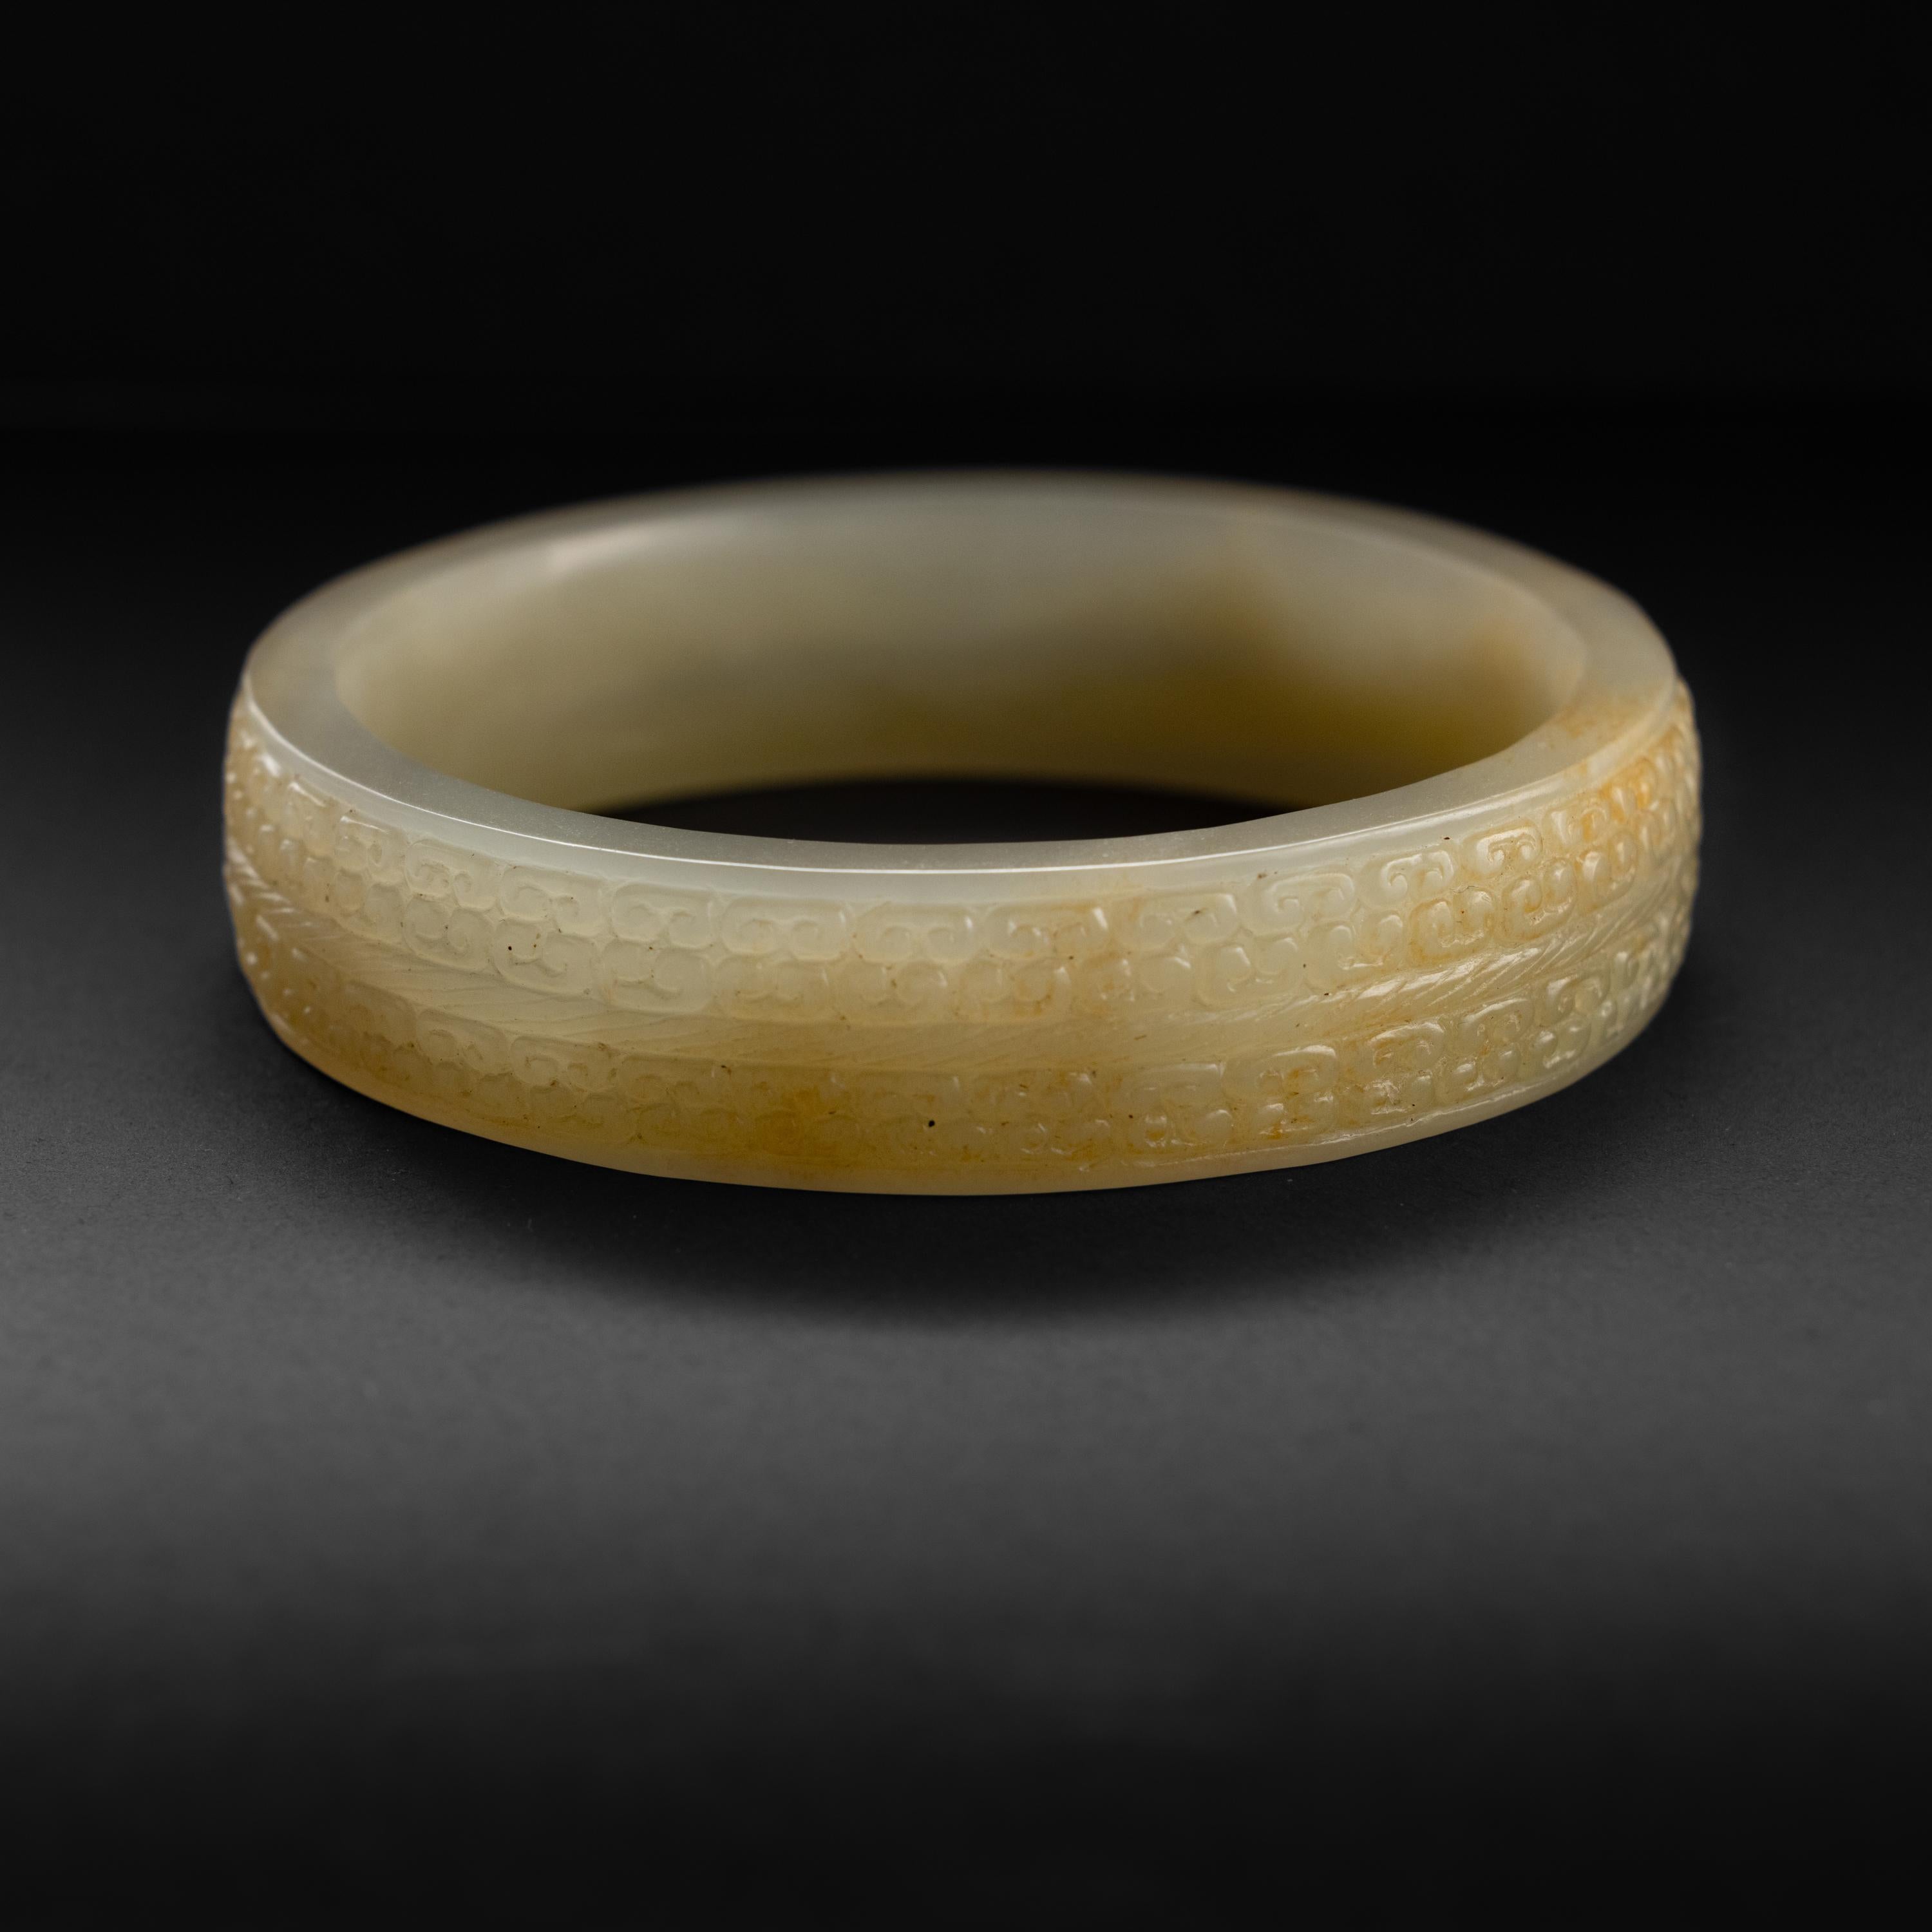 Fine carved jade bangles for men are few and far between. If often takes me over a year to source (or commission) a man-sized bangle and in this case it was well worth the weight. Hand-carved from 100% natural and untreated nephrite jade. This